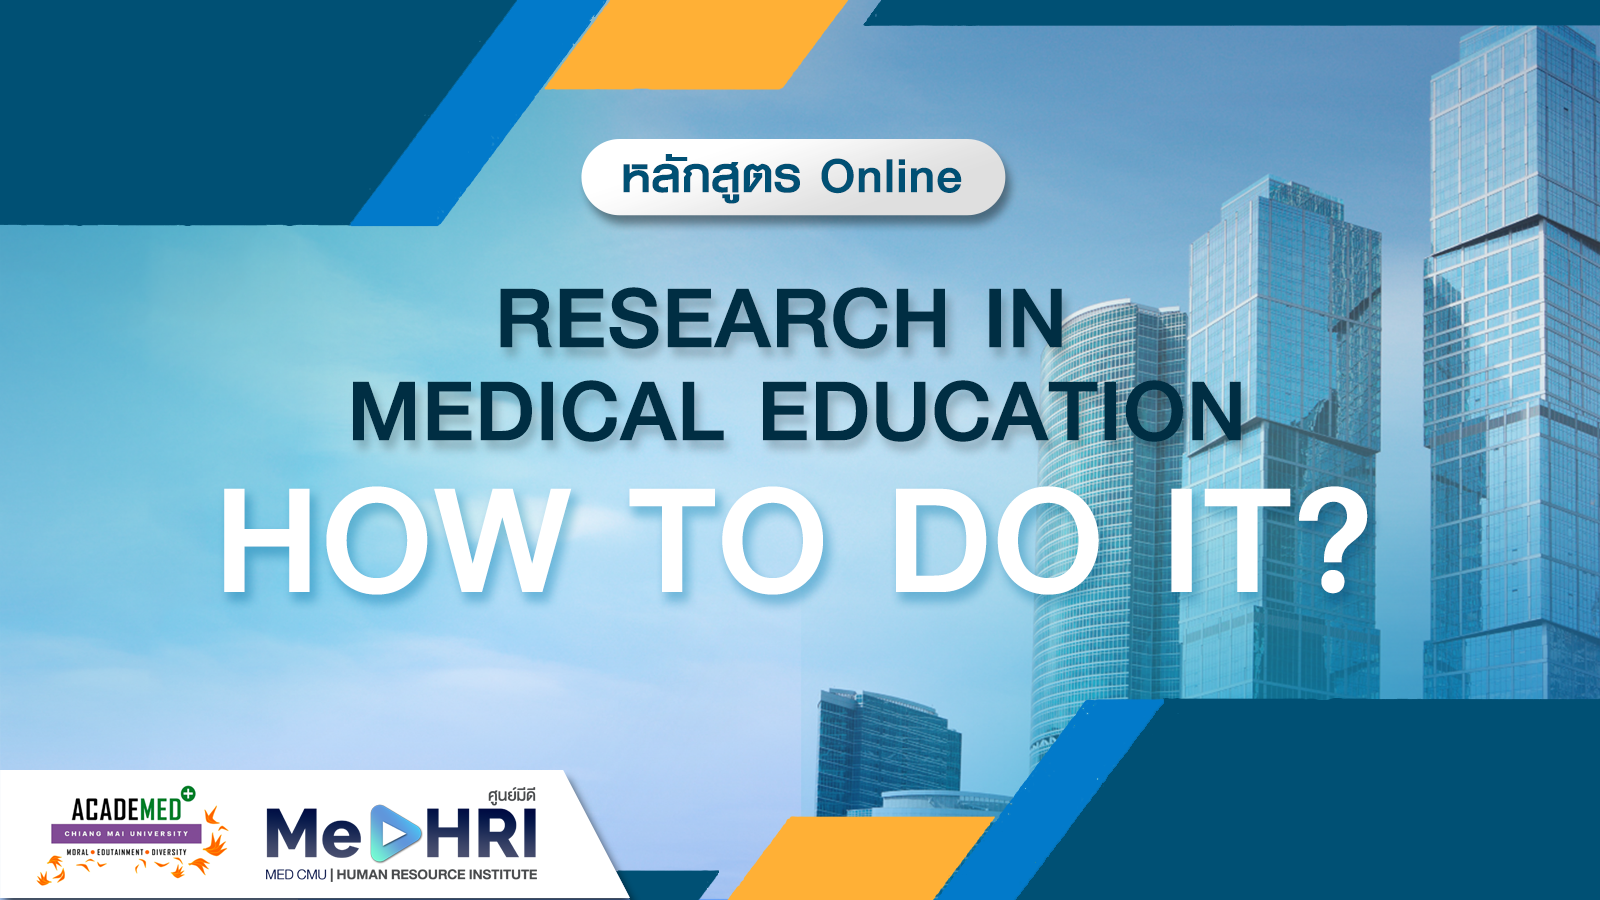 Research in medical education  - How to do it